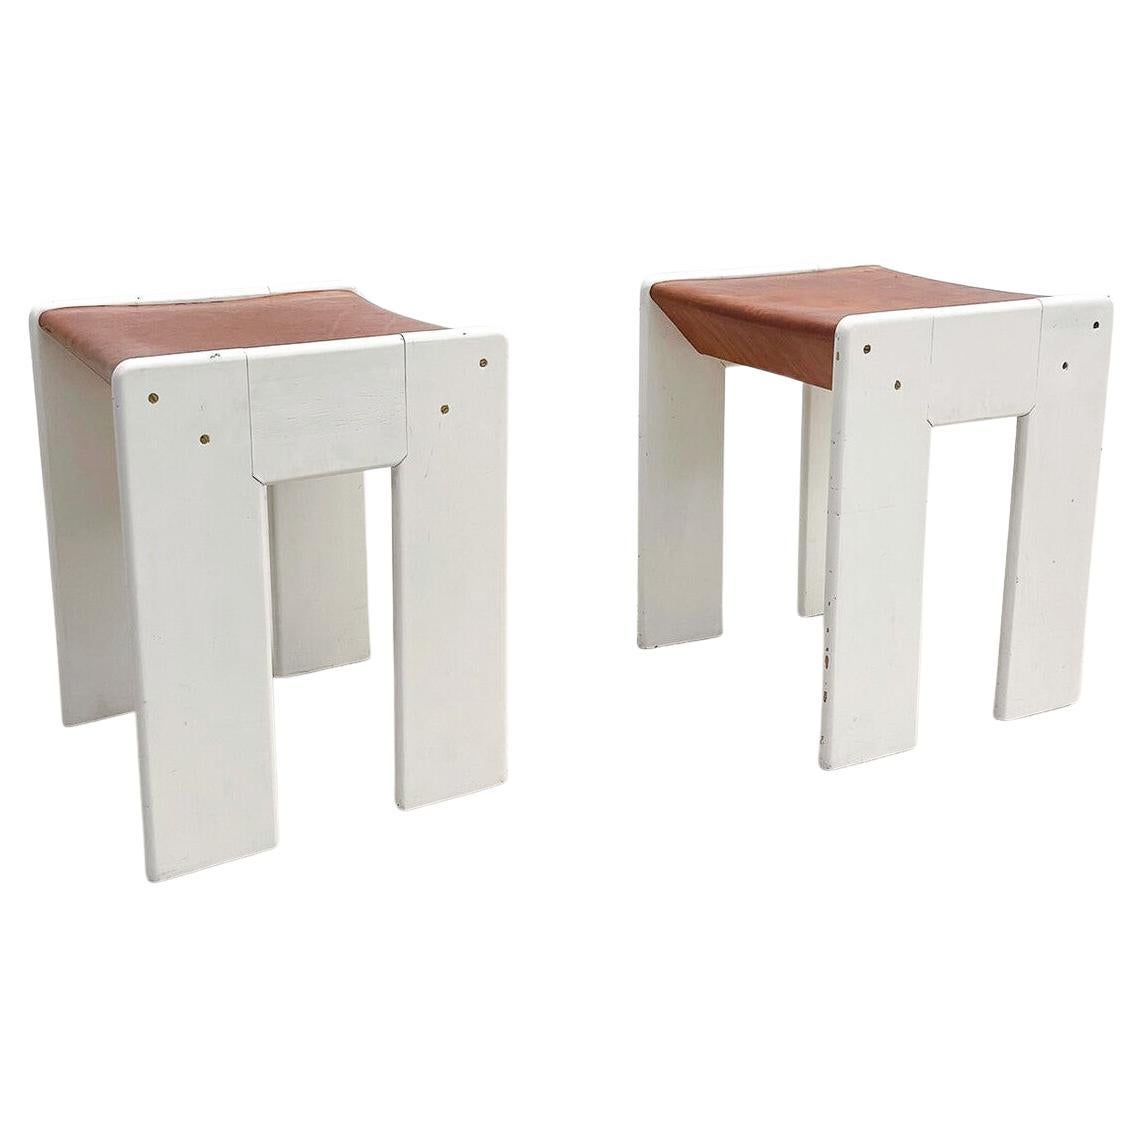 Mid-Century Modern Pair of Stools, White wood and Cognac Leather, Italy, 1960s For Sale